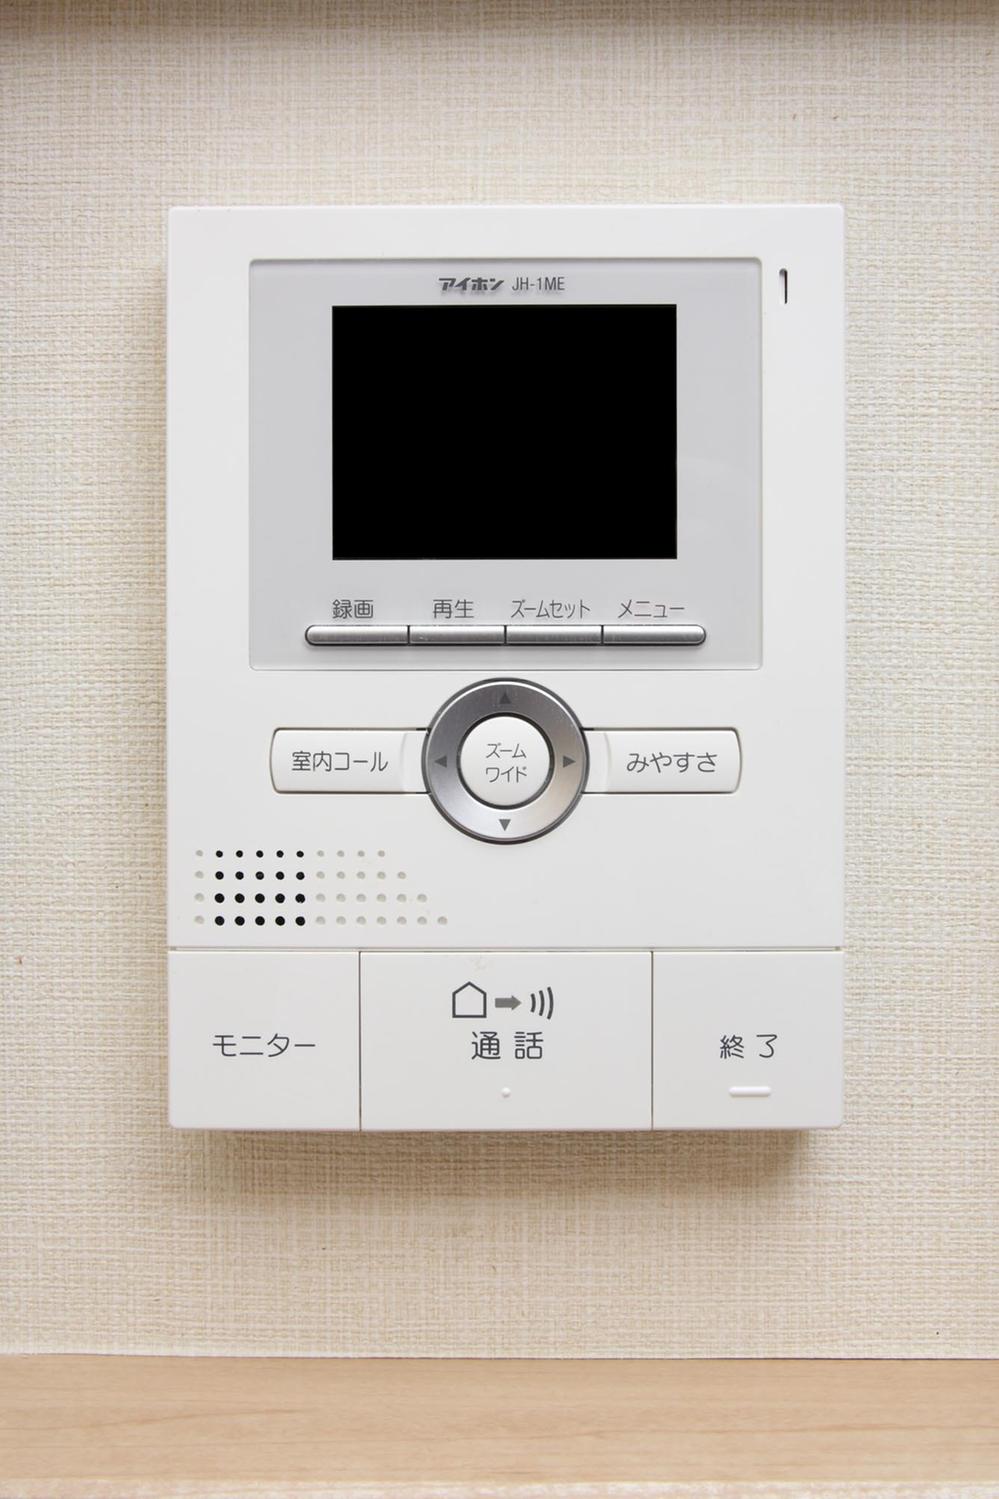 Security equipment. Installing the intercom that you can check in advance to the visitors in the color monitor. You can interact with hands-free, This is useful also comes with video recording function. (Reference photograph)